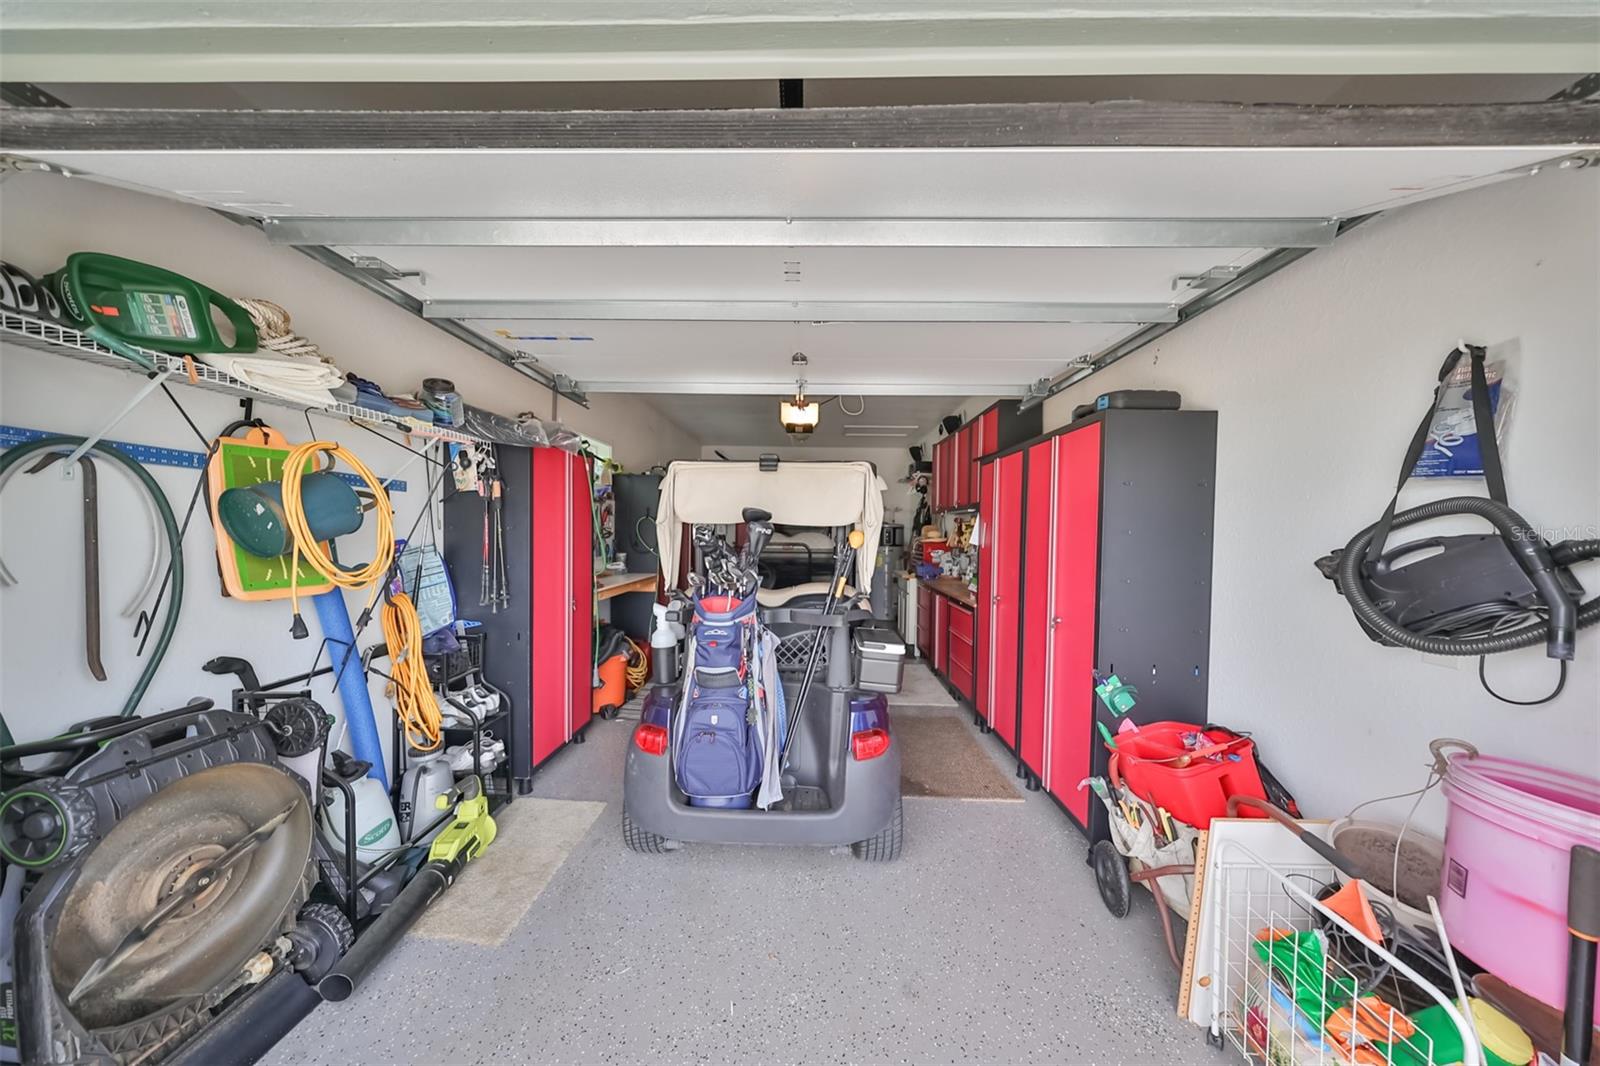 Second, connected garage space is large enough for a car, with epoxy flooring and perfect for tools and a golf cart or another car to fit!